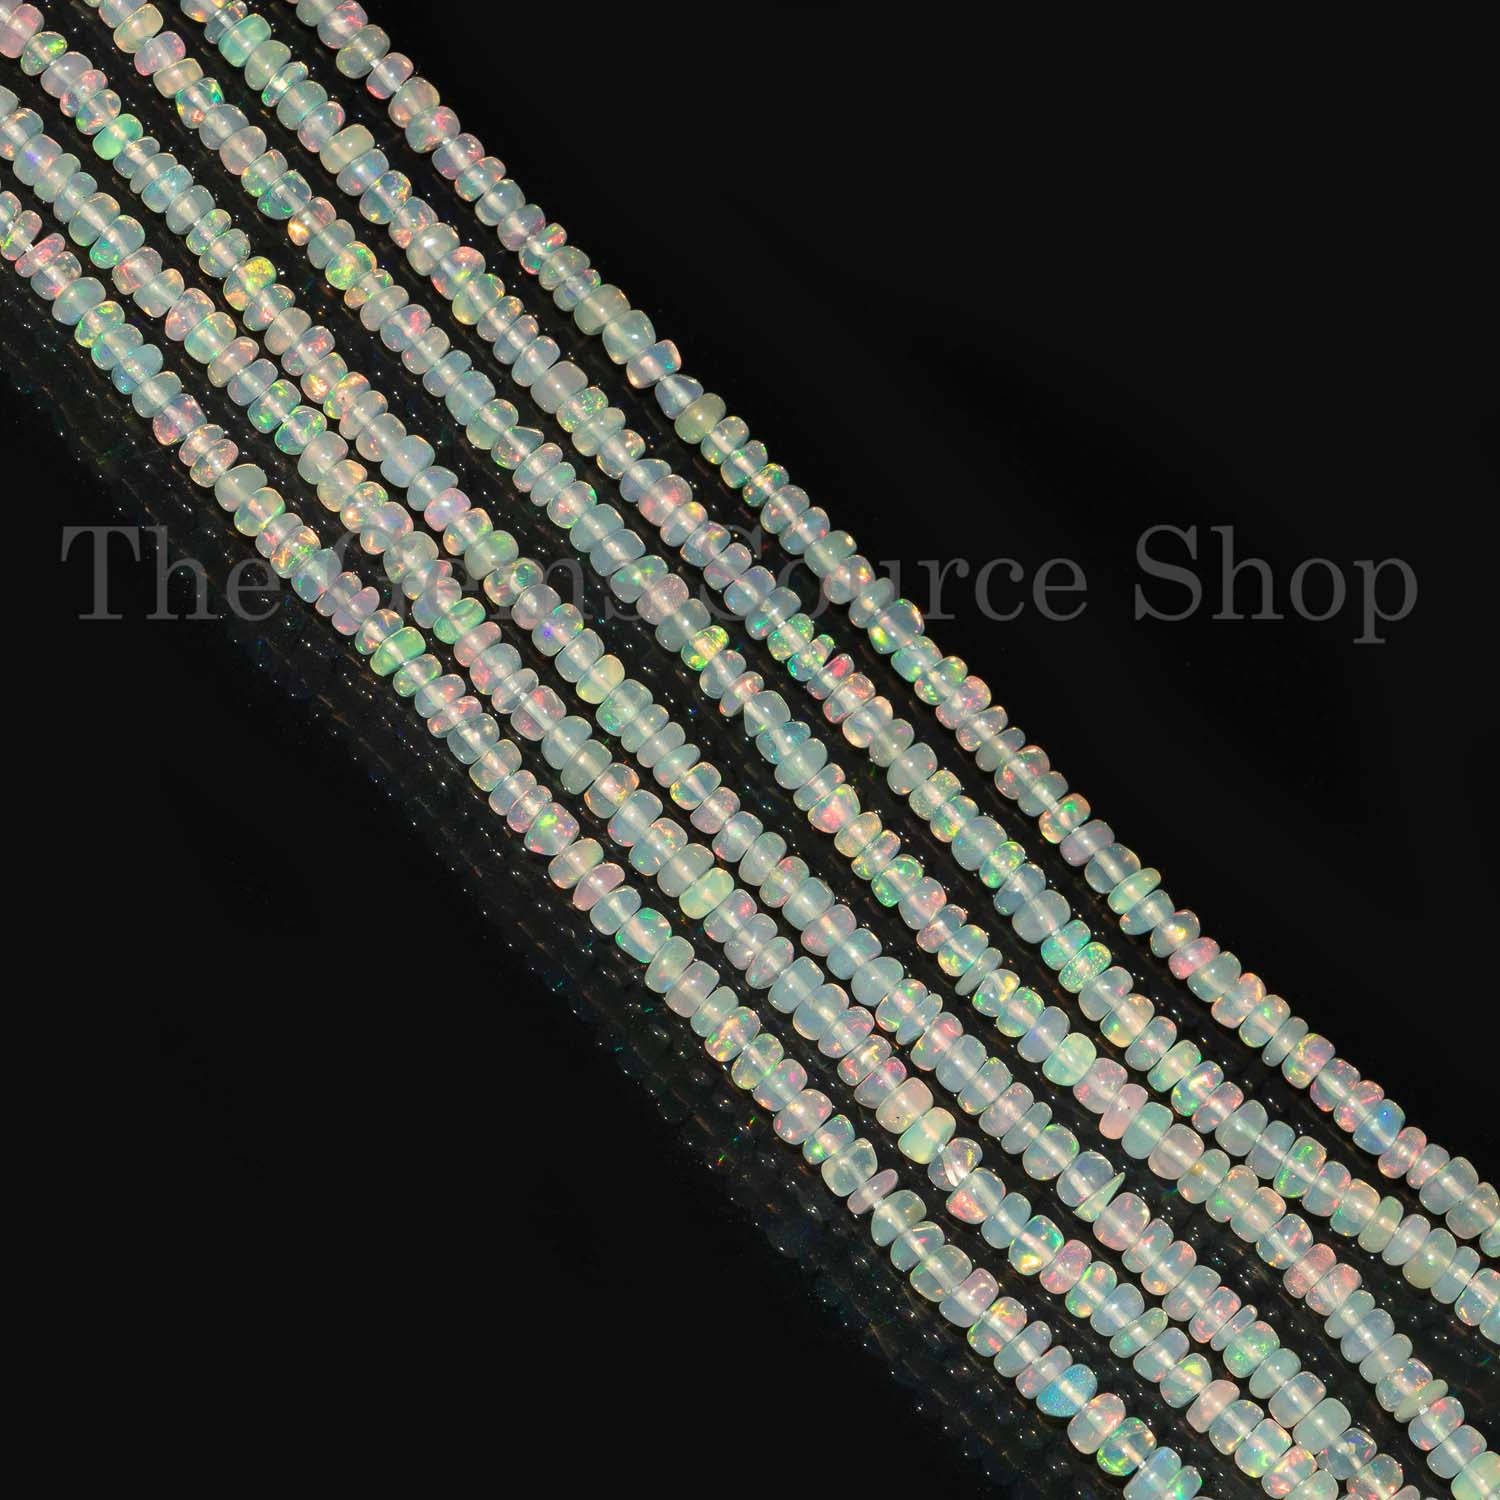 Natural Ethiopian Opal Beads, Smooth Rondelle Shape Beads, Ethiopian Opal Gemstone Beads